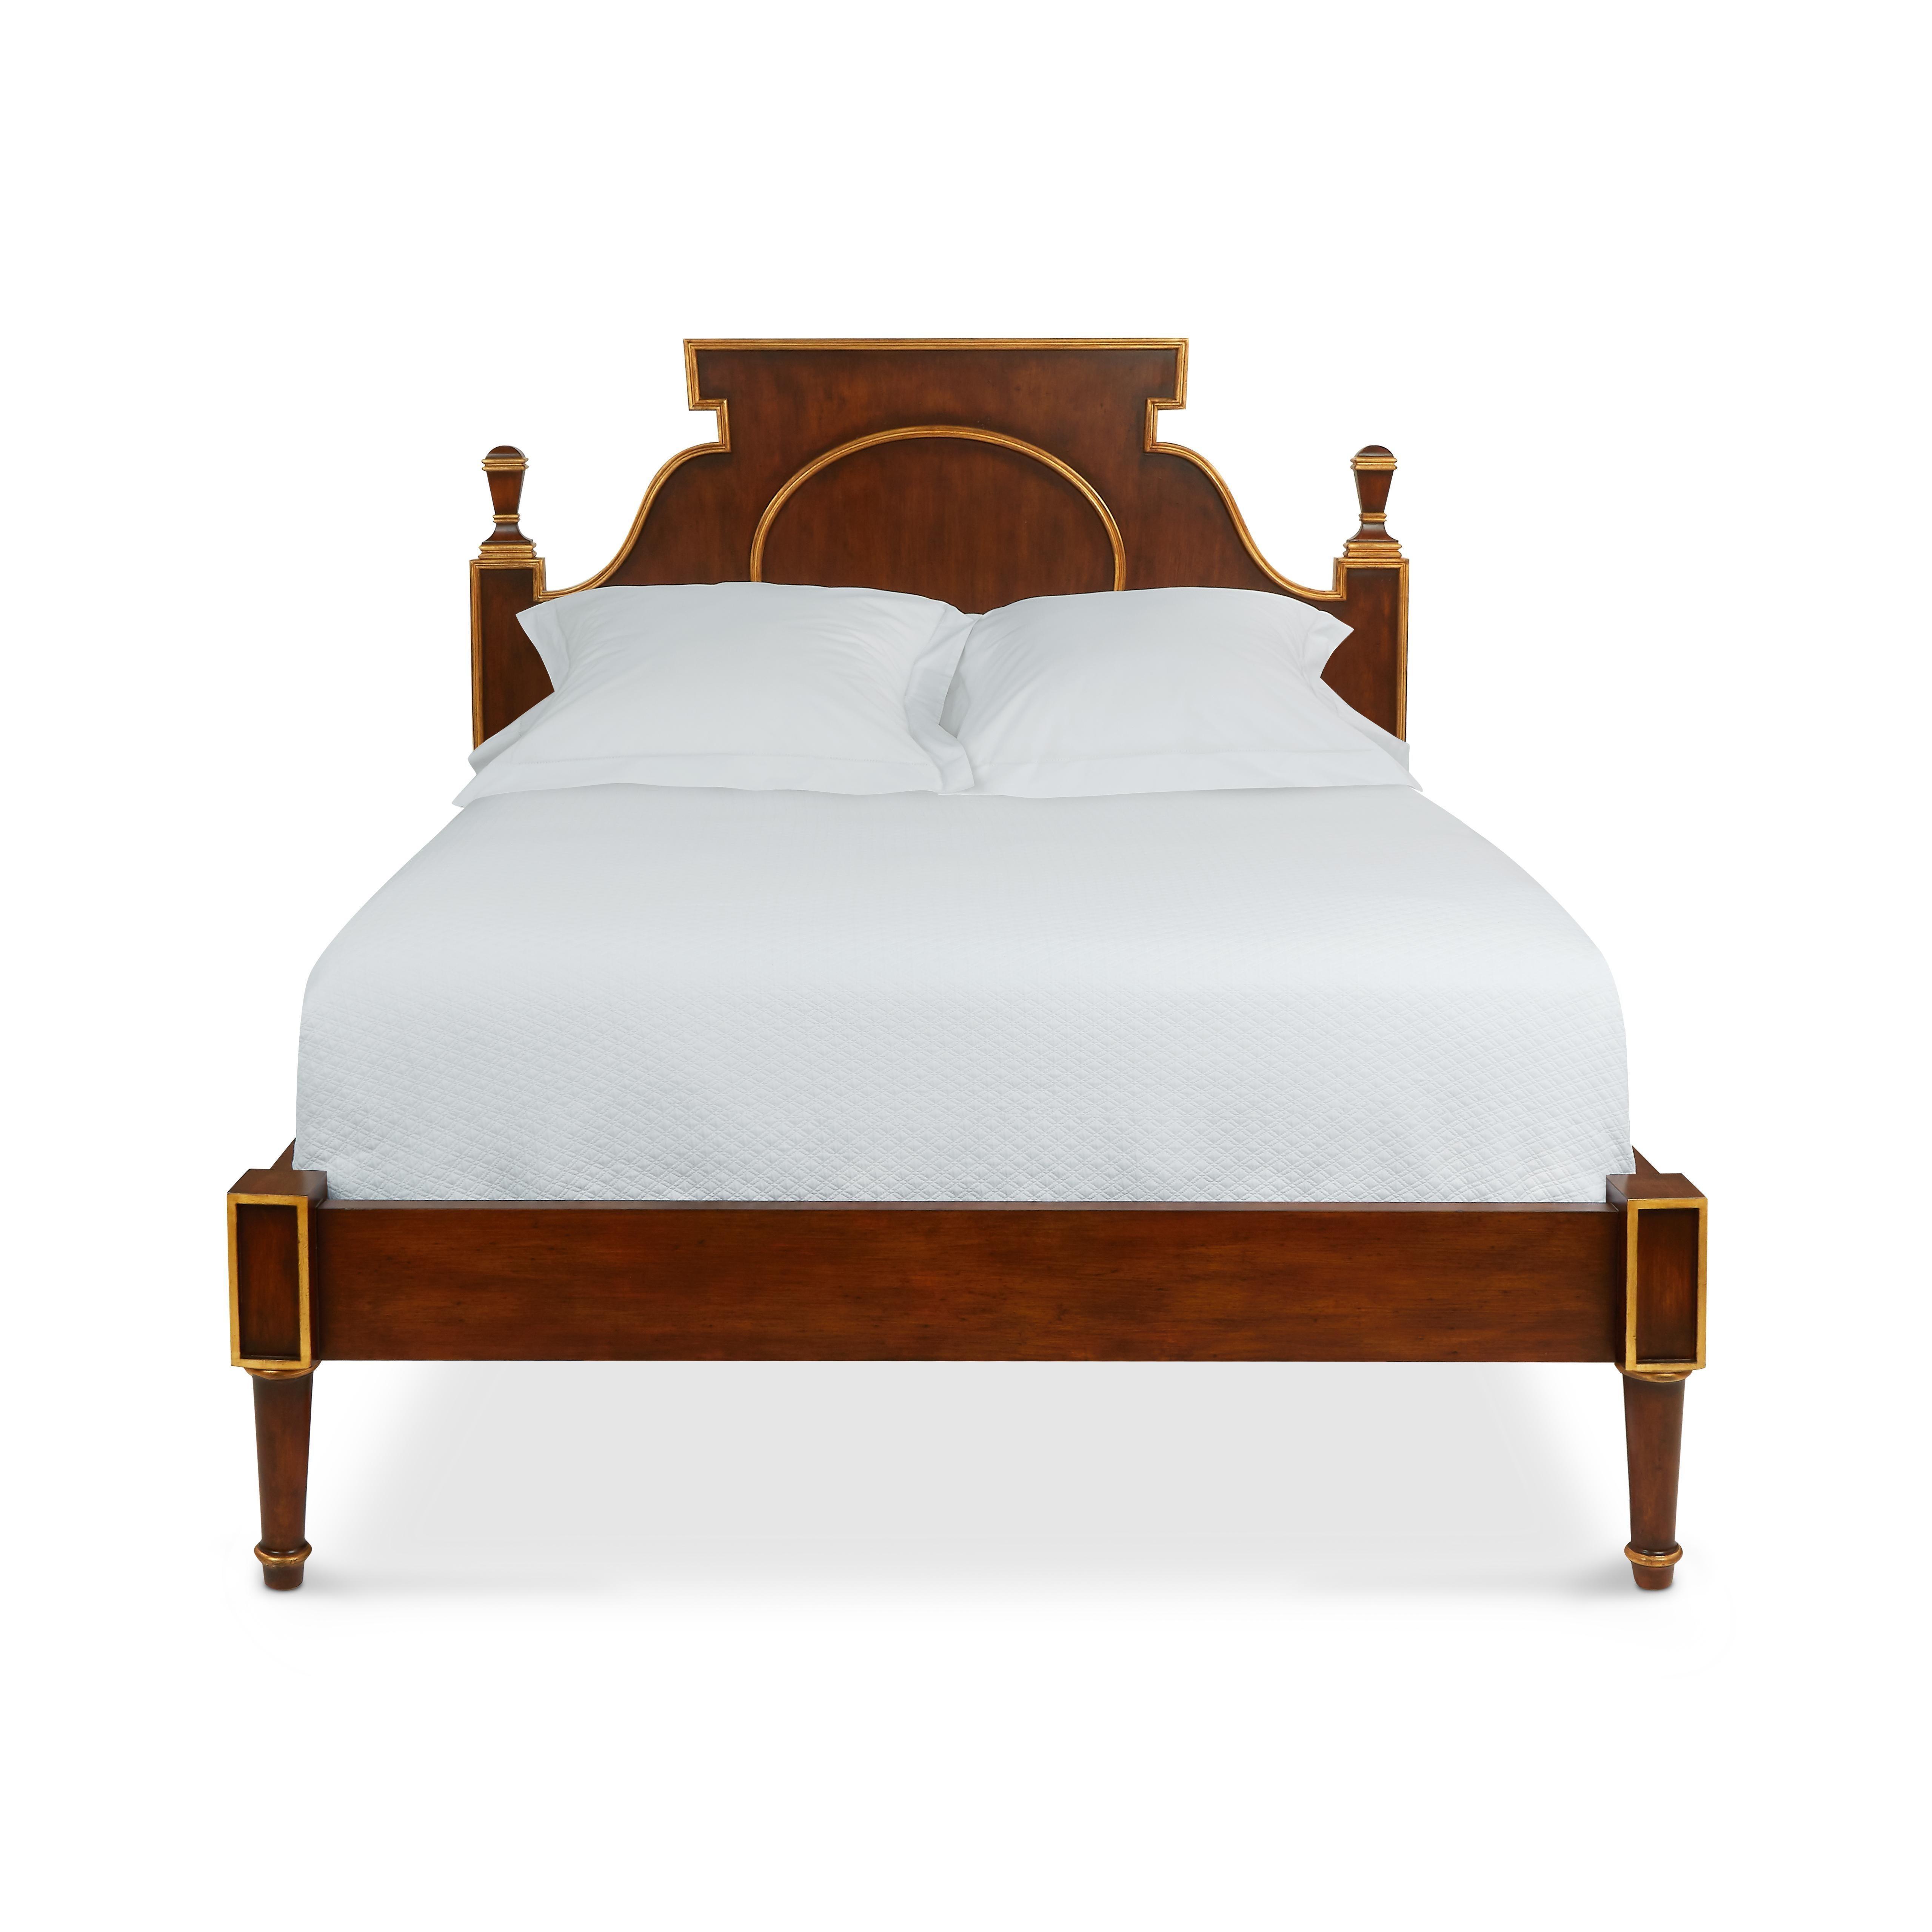 Nineteenth century Italian antique beds inspired our Lucia bed, which features a beautiful faux walnut grain painted finish. Gold detailing along the edges, including the headboard finials and oval medallion, highlight its elegant shape.
